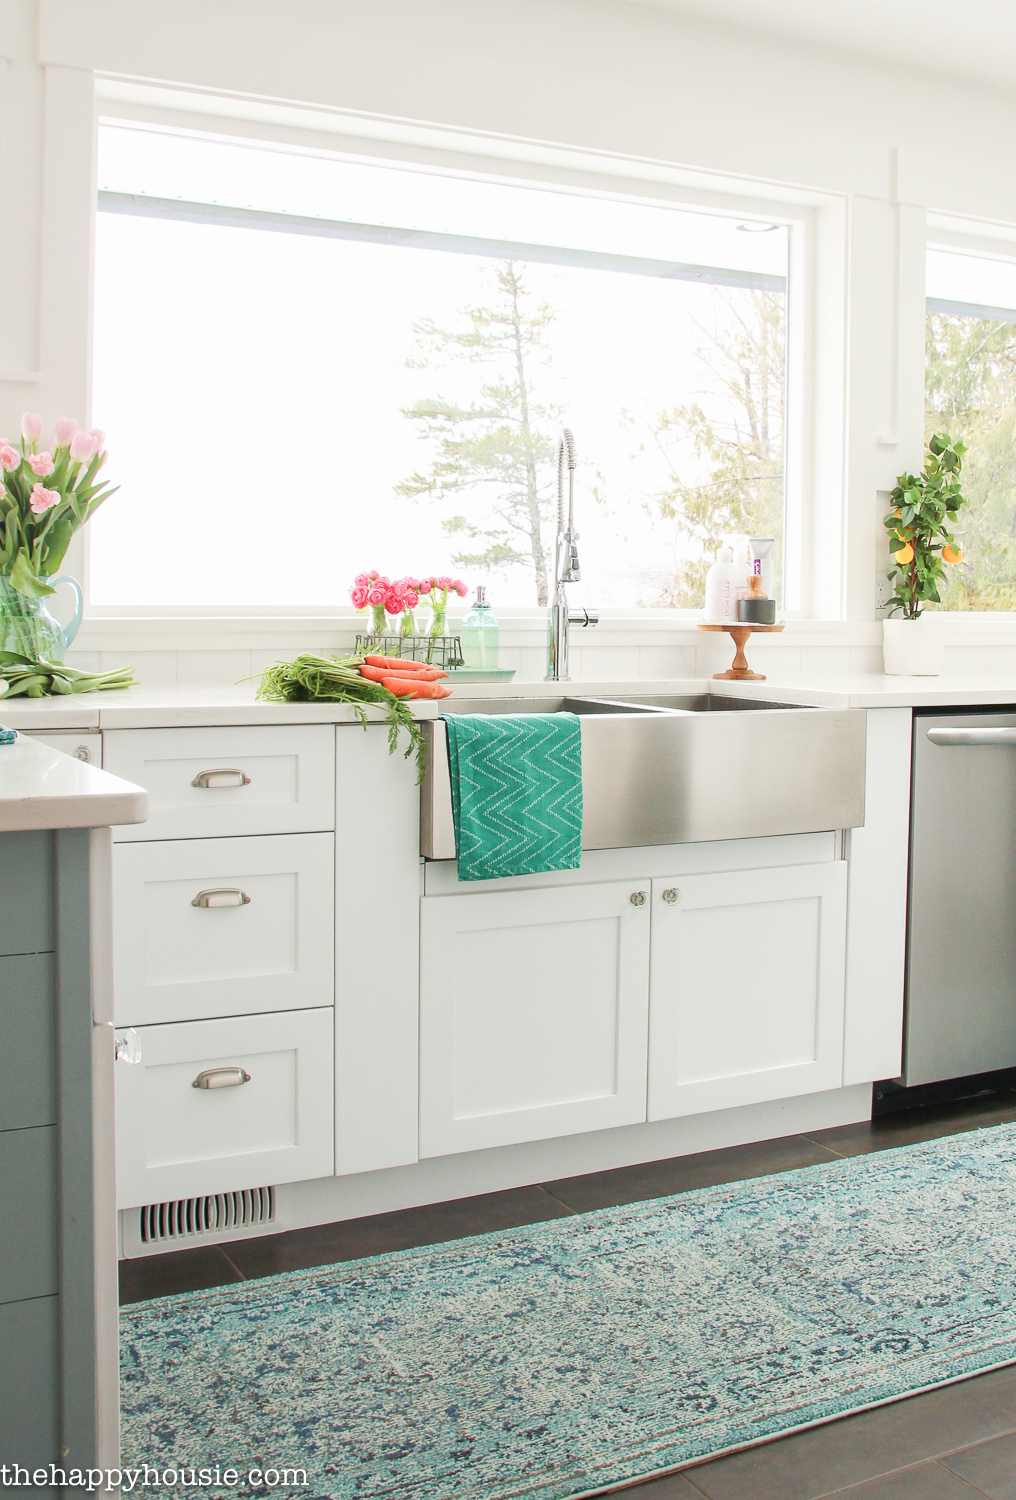 A turquoise cloth hangs from the apron sink in the kitchen.